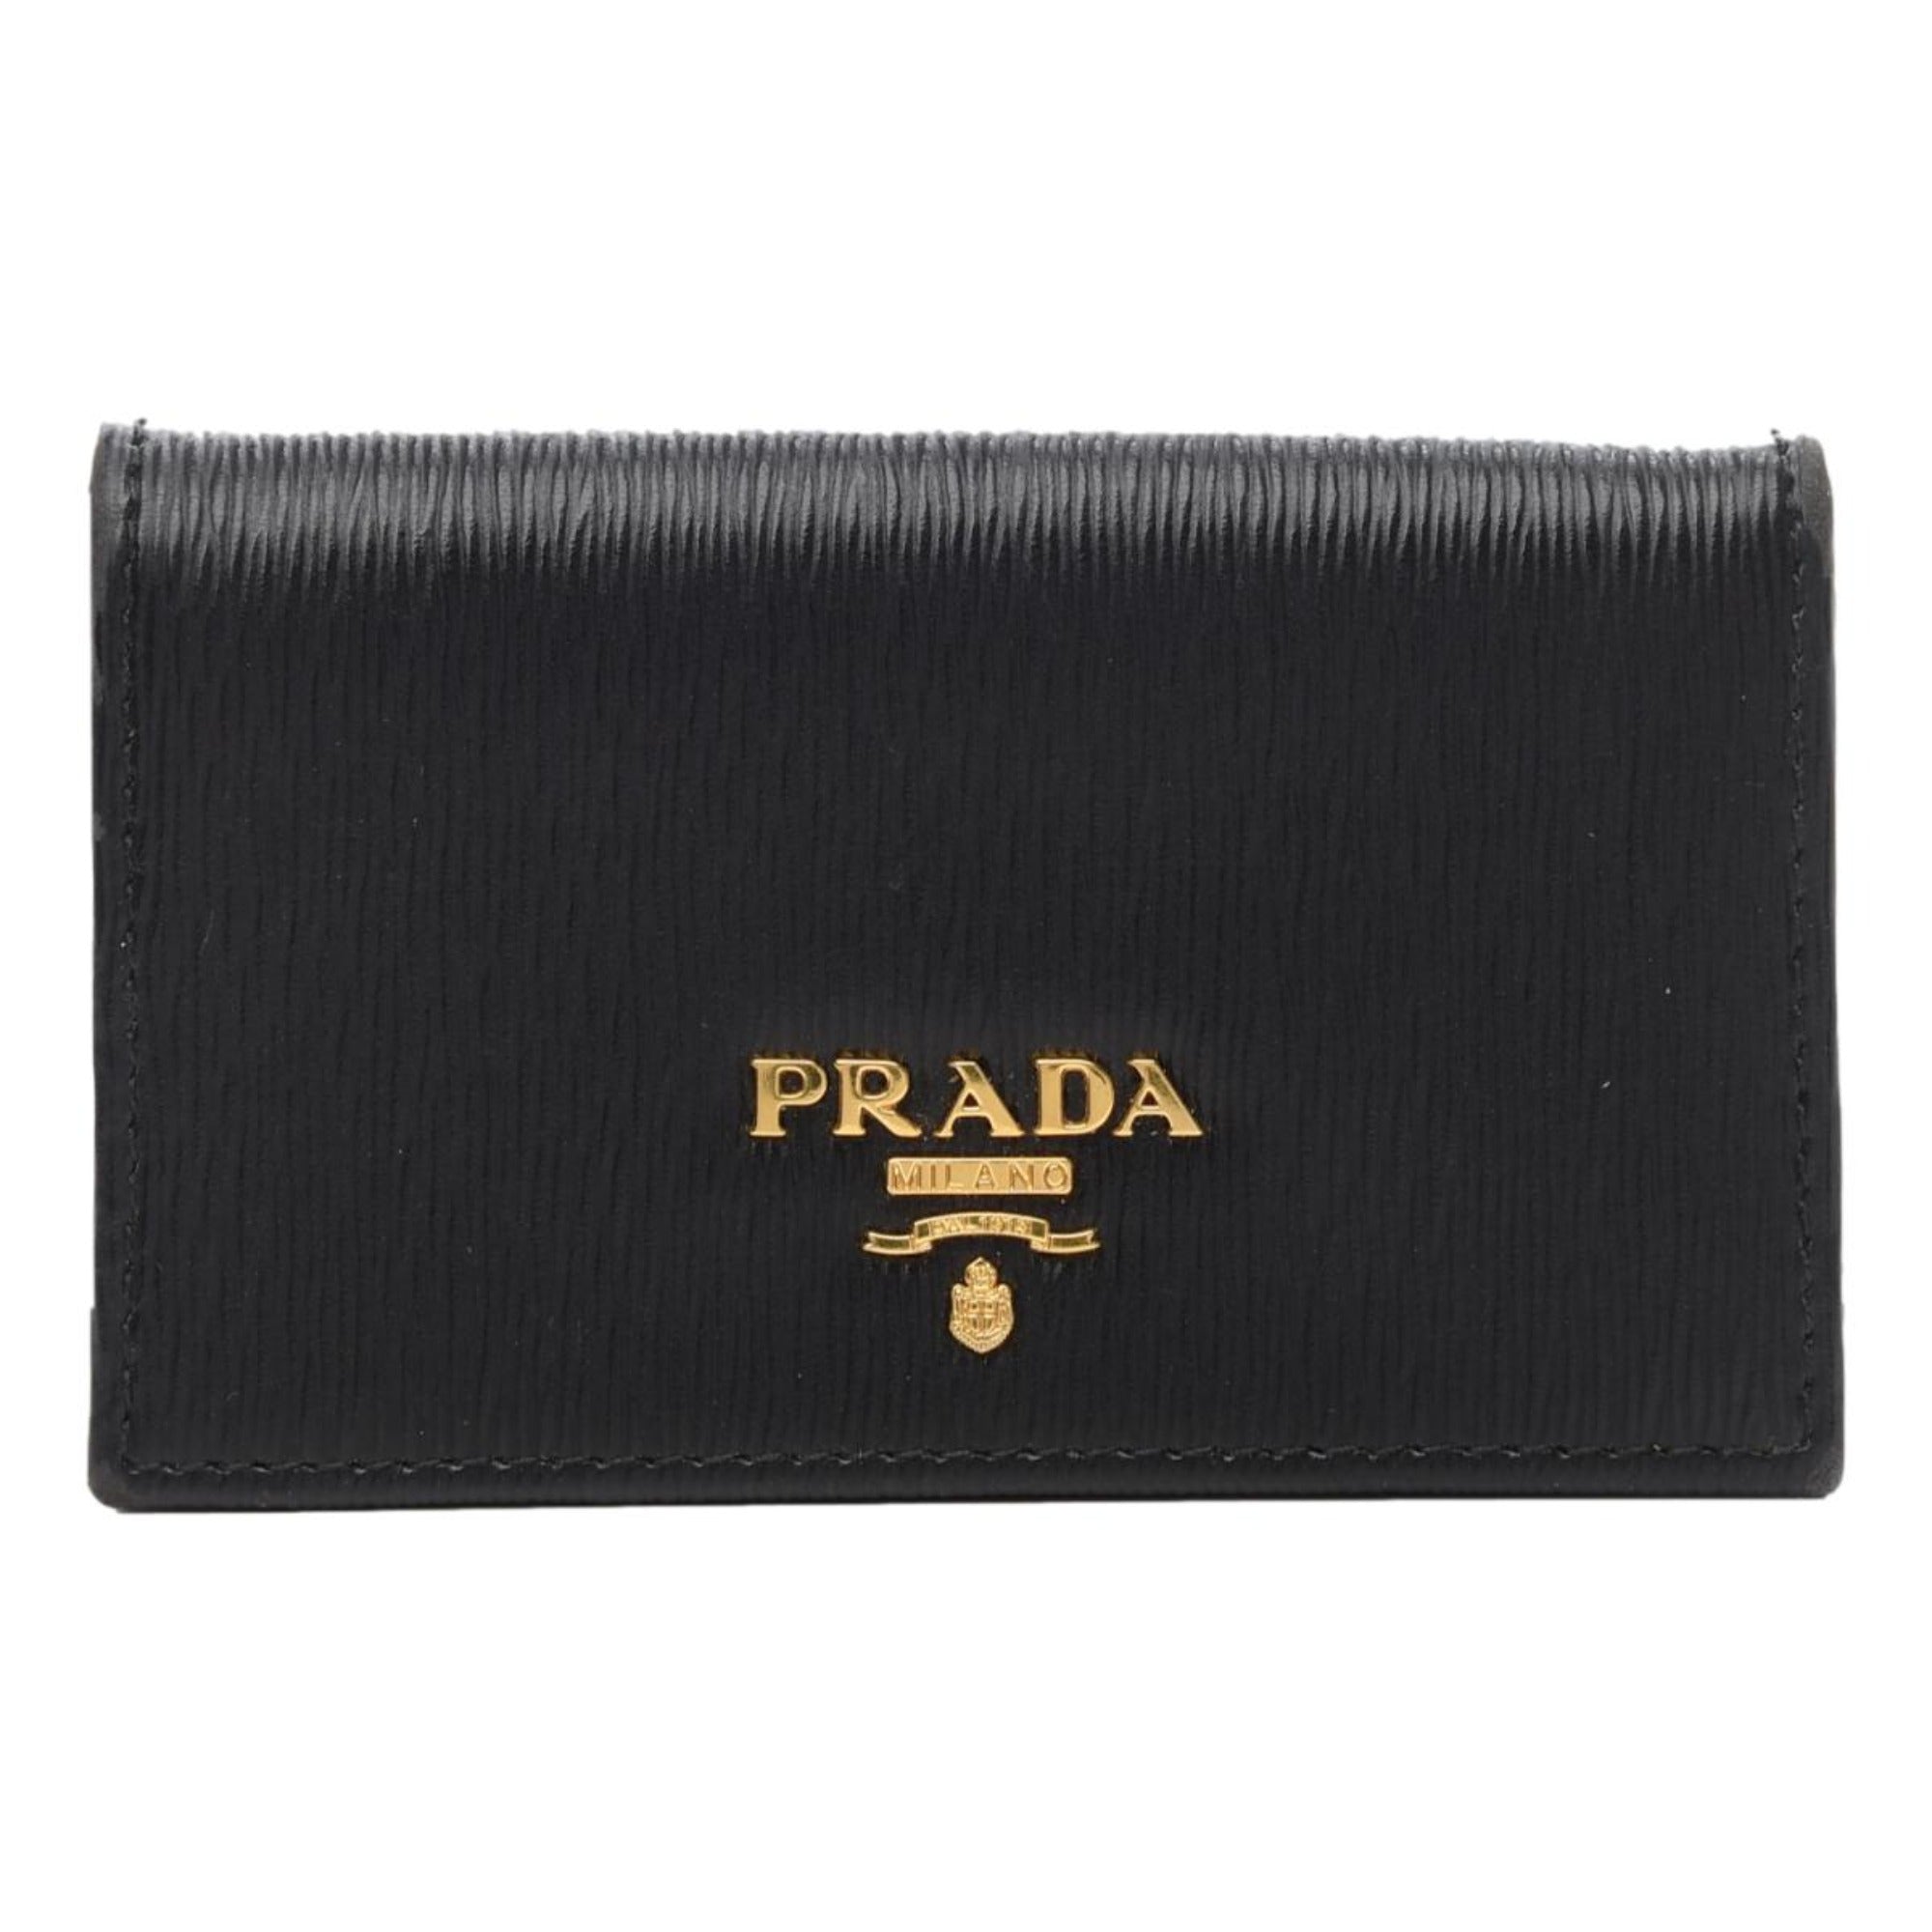 Prada Black Vitello Move Leather Card Case Wallet 1MC122 at_Queen_Bee_of_Beverly_Hills